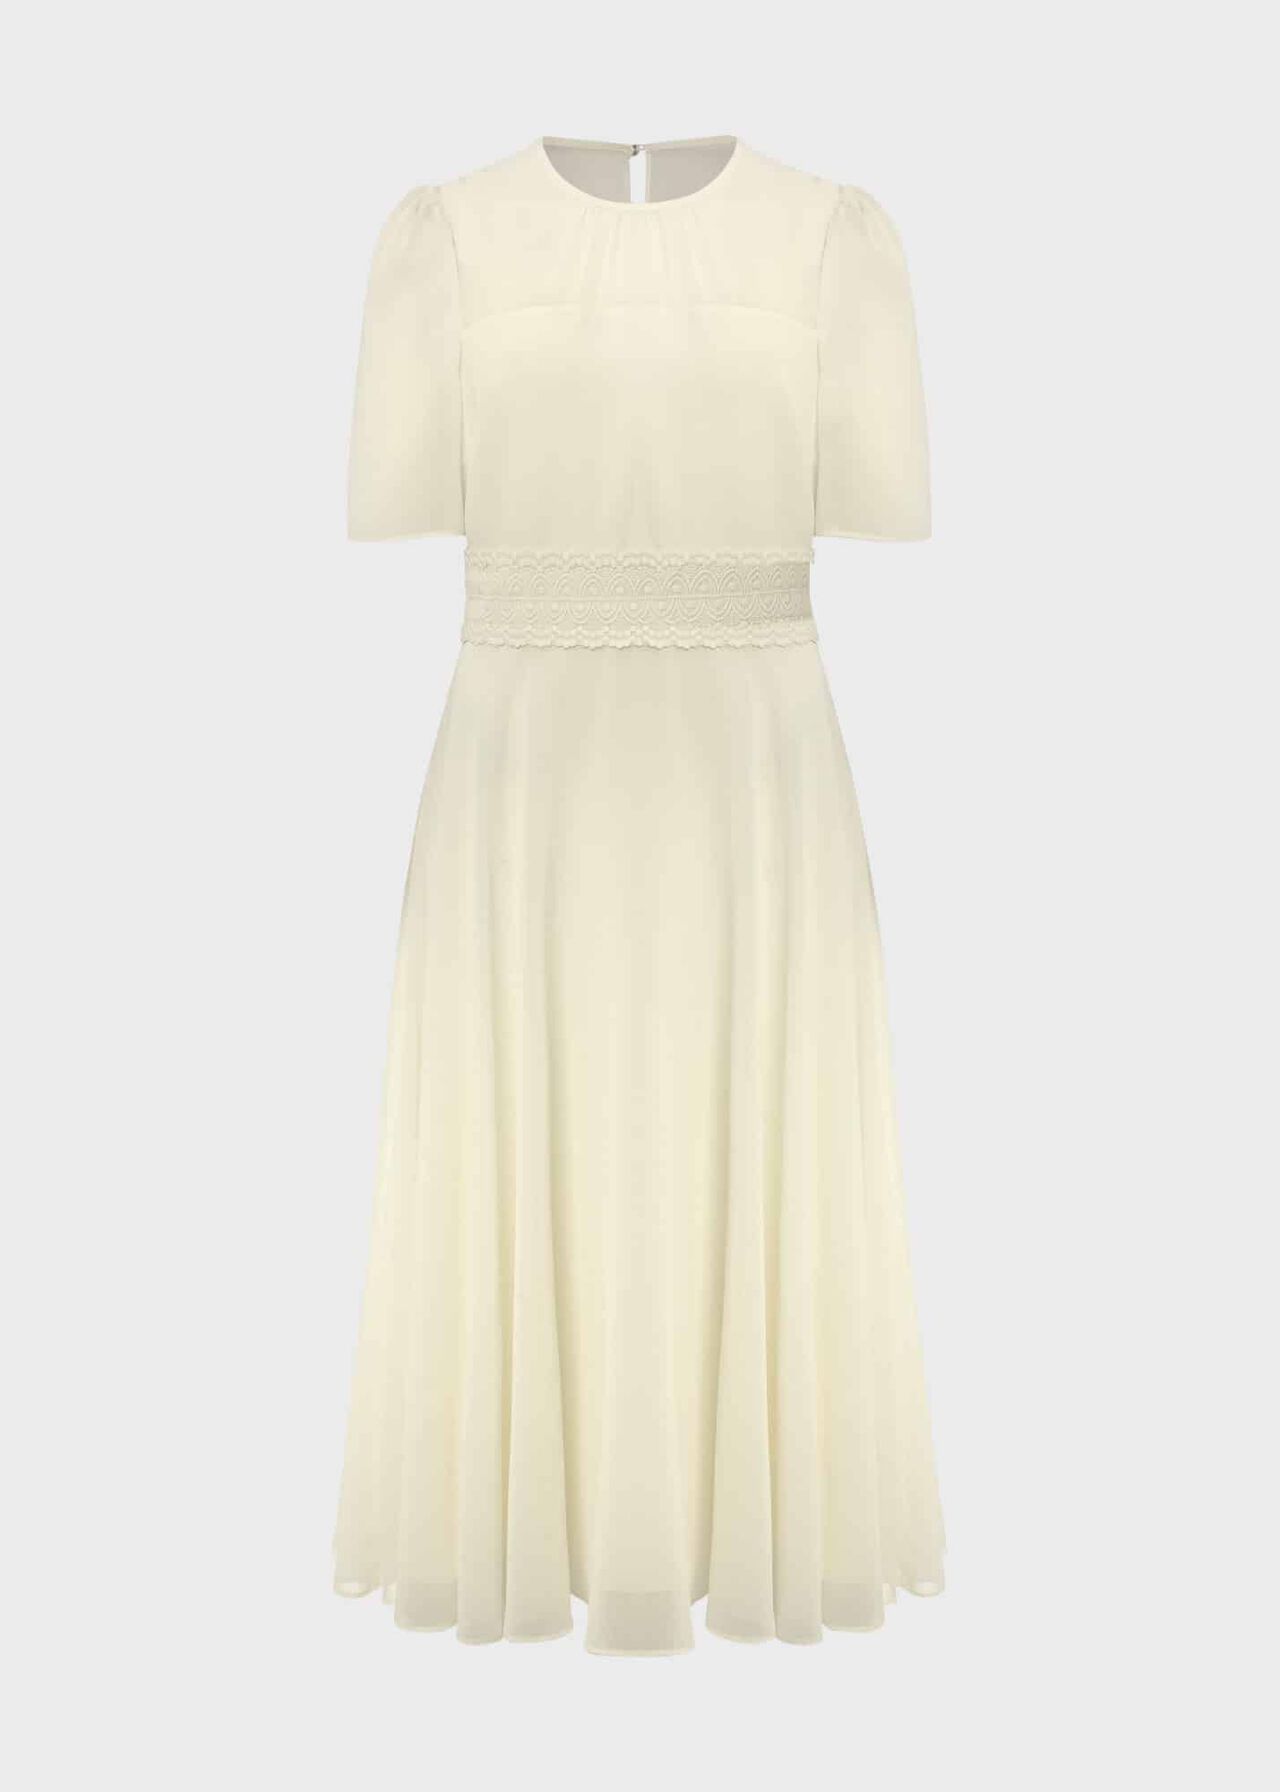 Cressida Fit And Flare Dress, Pale Yellow, hi-res